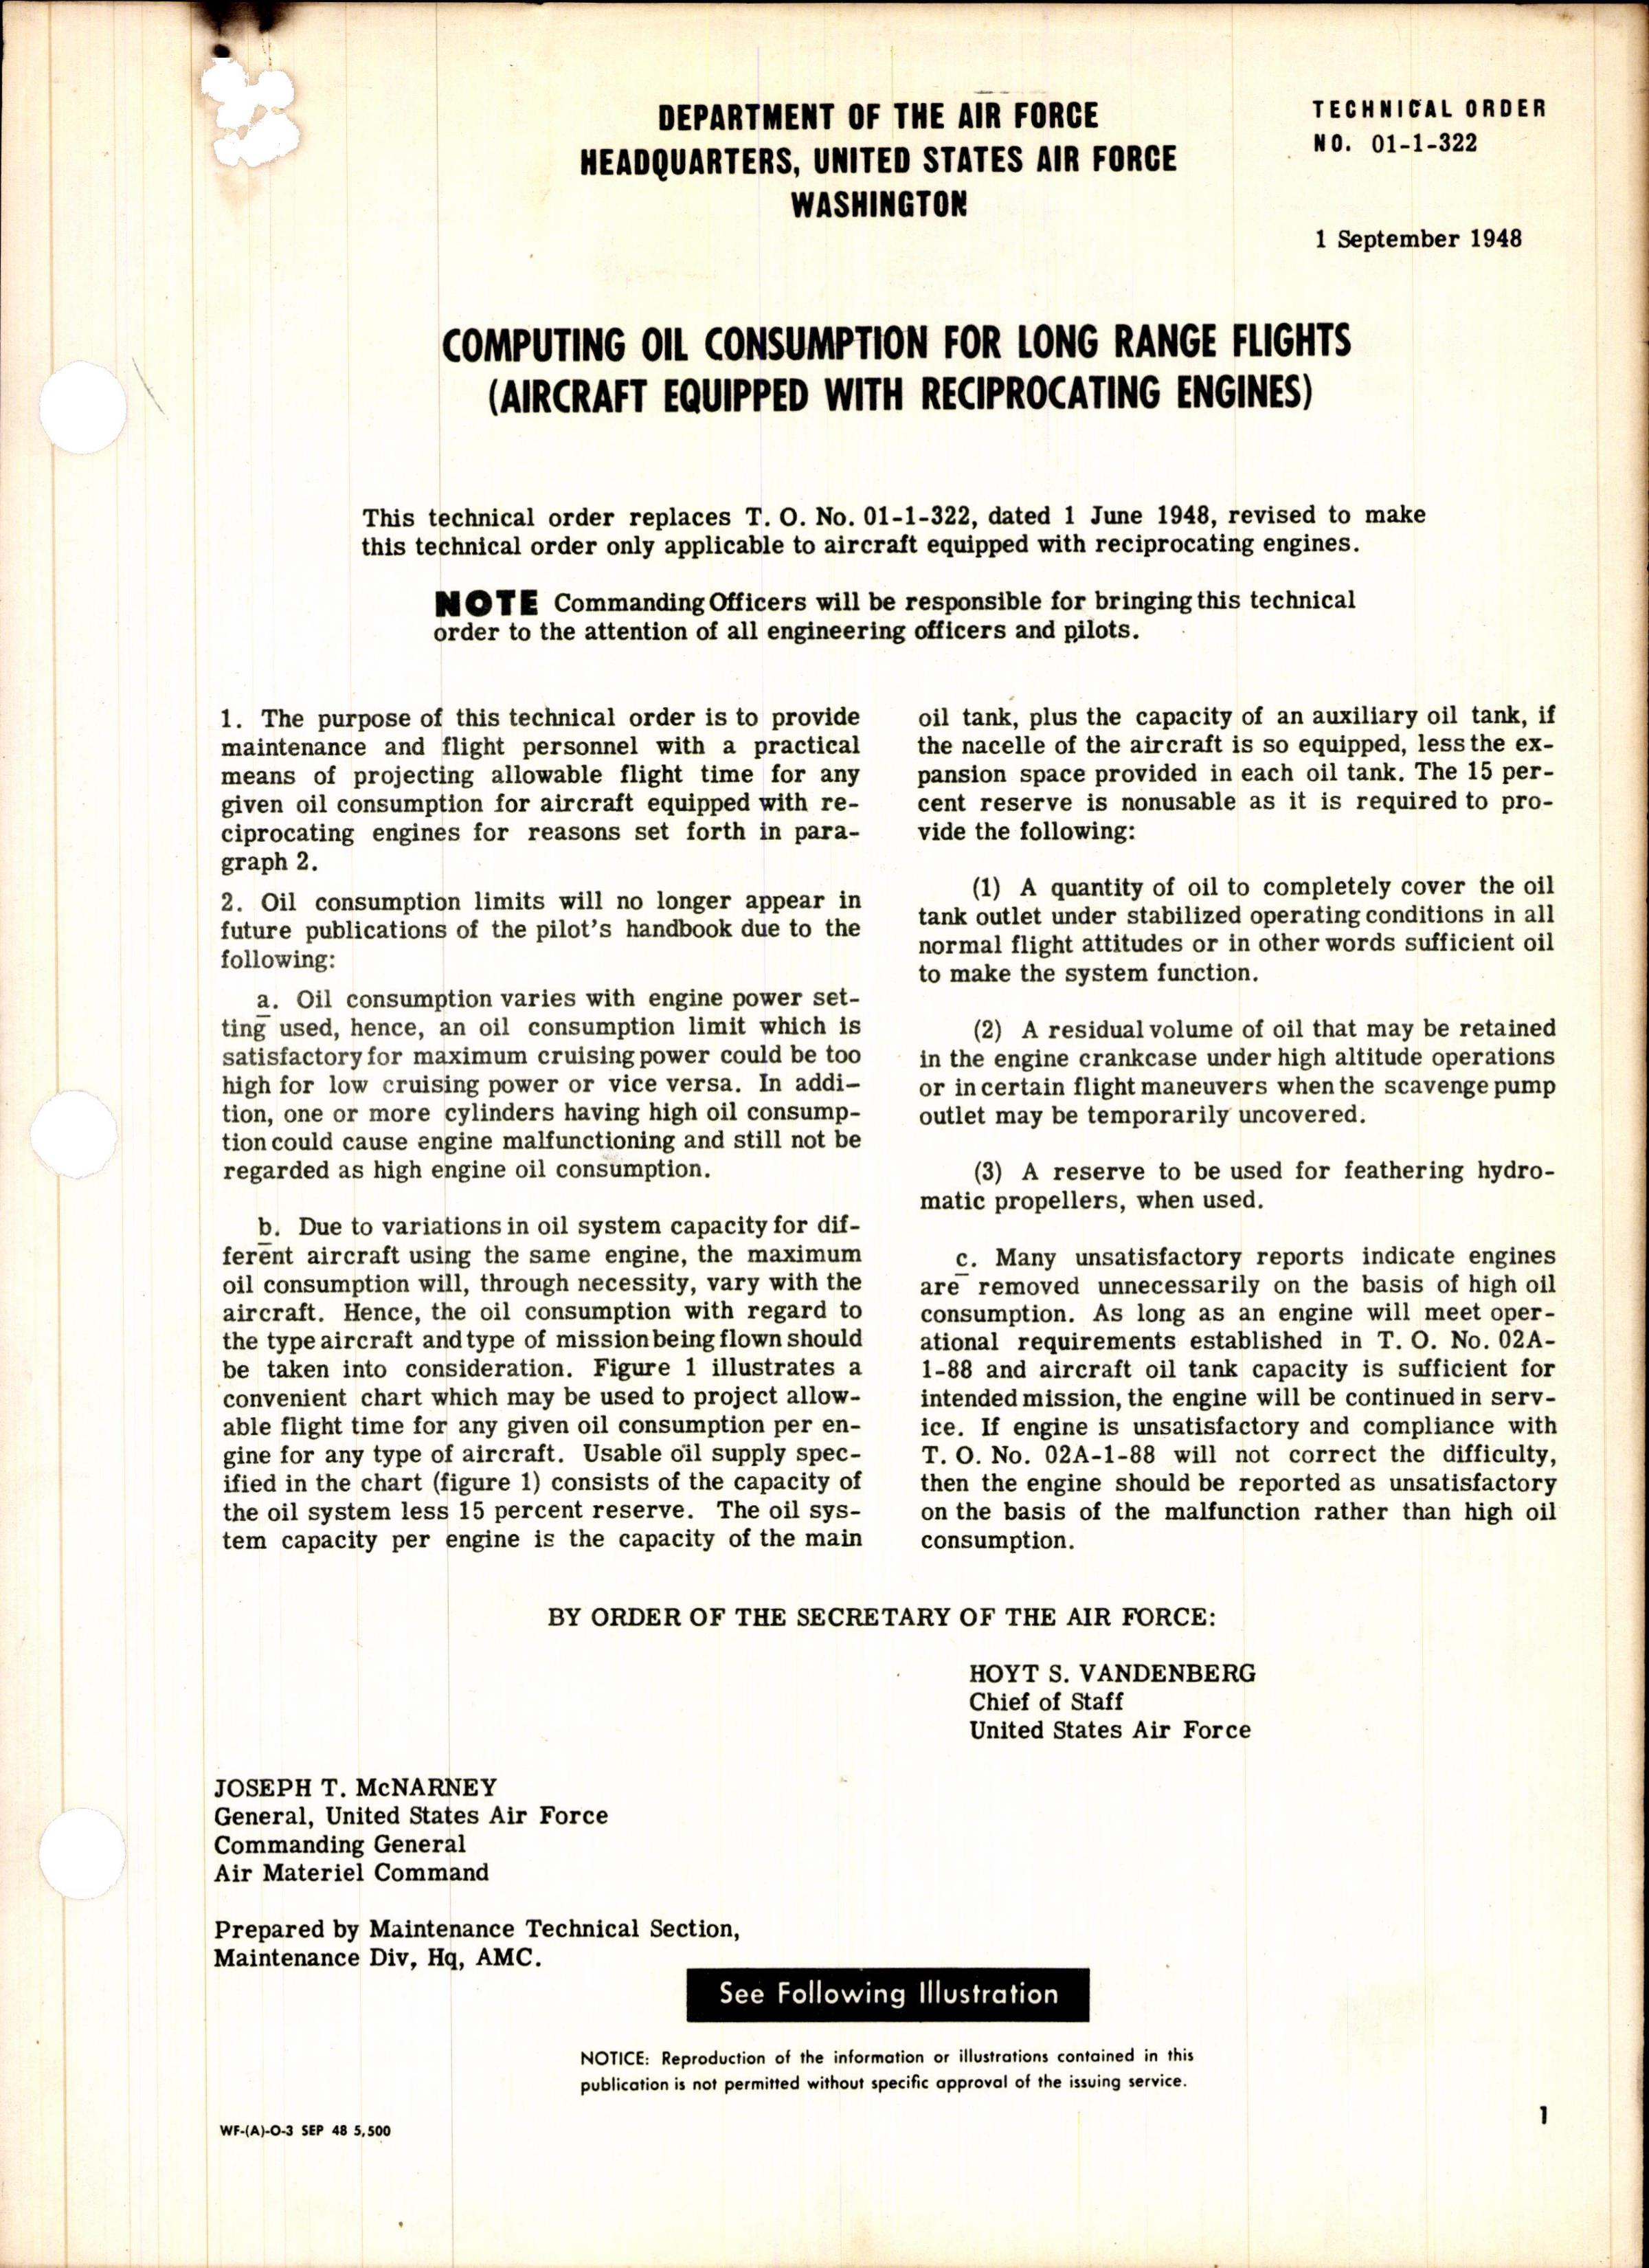 Sample page 1 from AirCorps Library document: Computing Oil Consumption for Long Range Flights